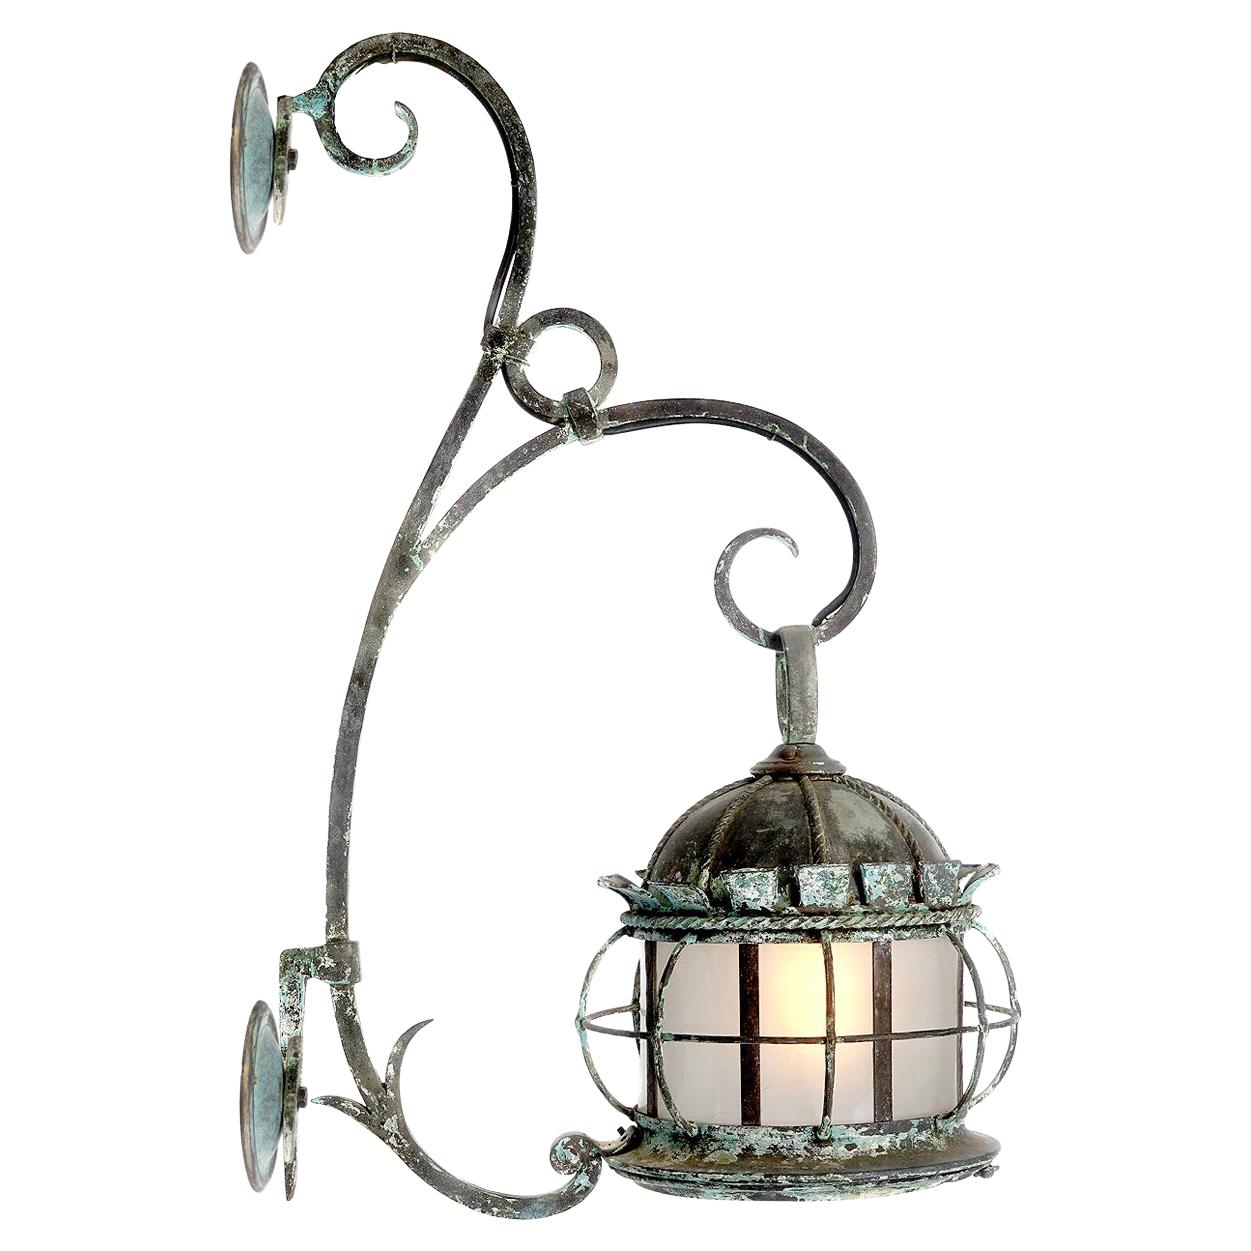 Large Early Rustic Estate Sconce